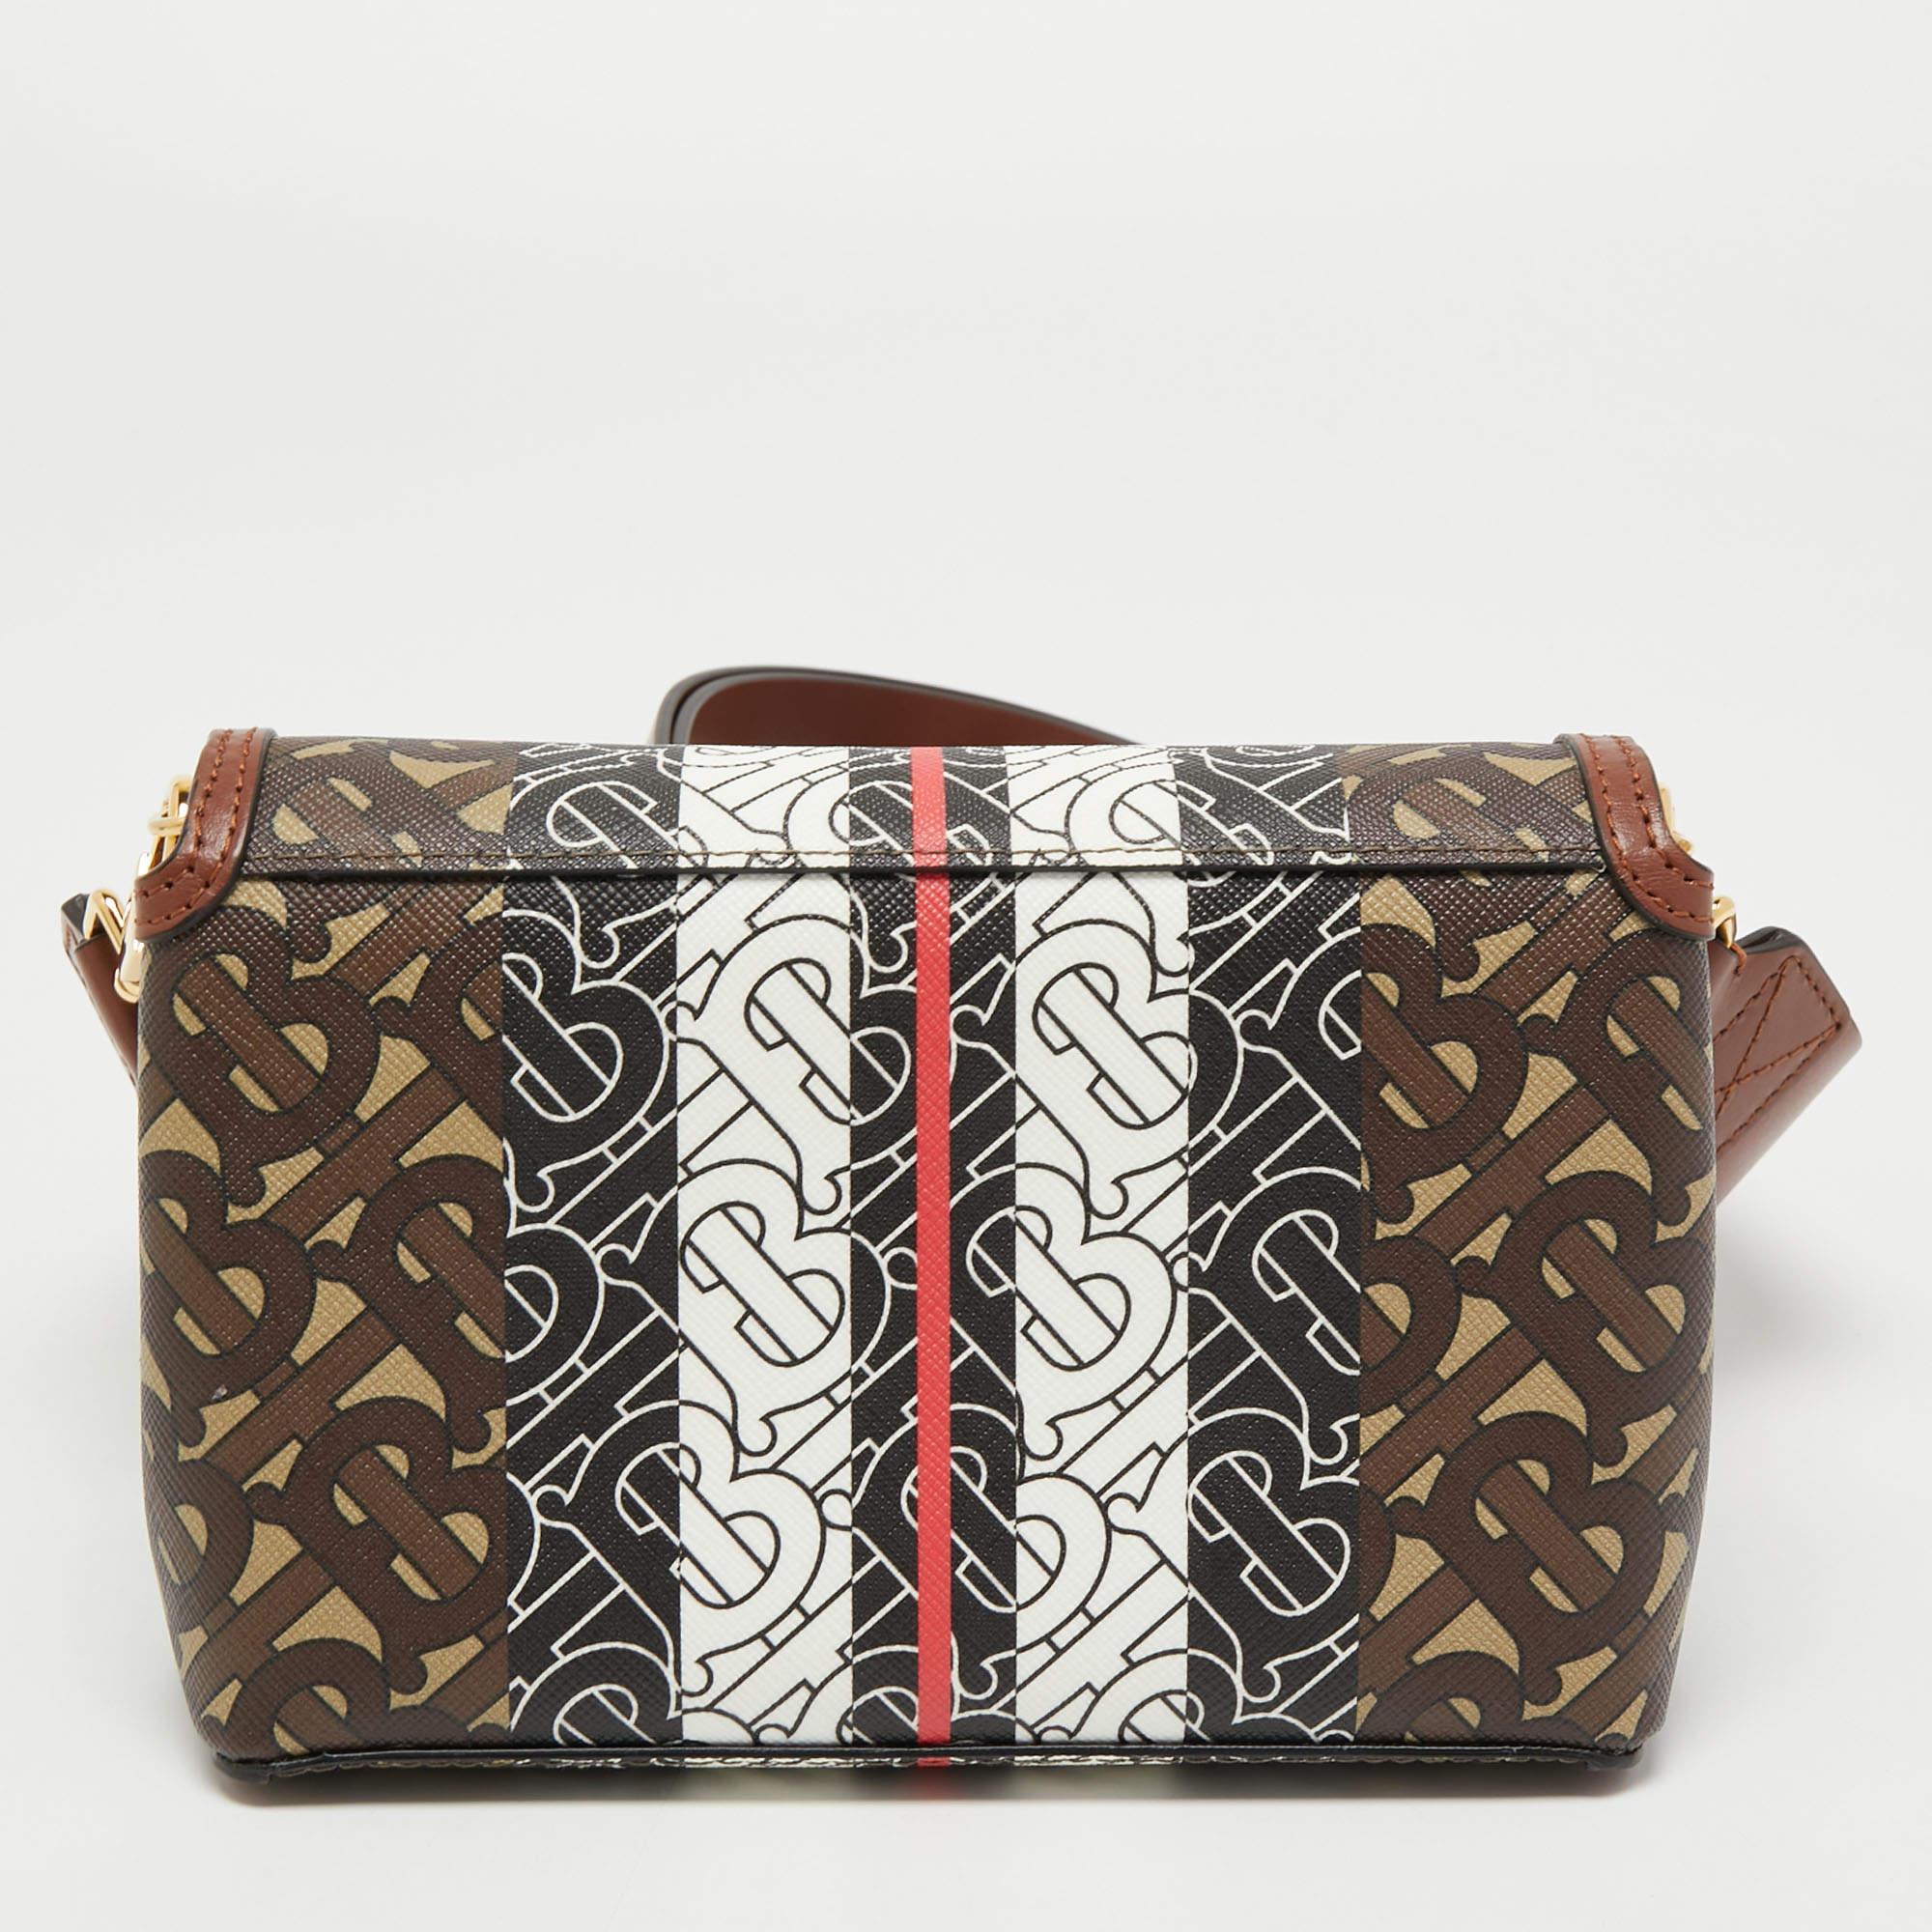 Burberry's TB monogram gives any creation a modern update. This Hackberry bag is a case in point. It is covered in TB-print coated canvas in luxe shades, transforming the classic flap silhouette into a contemporary accessory.

Includes: Original